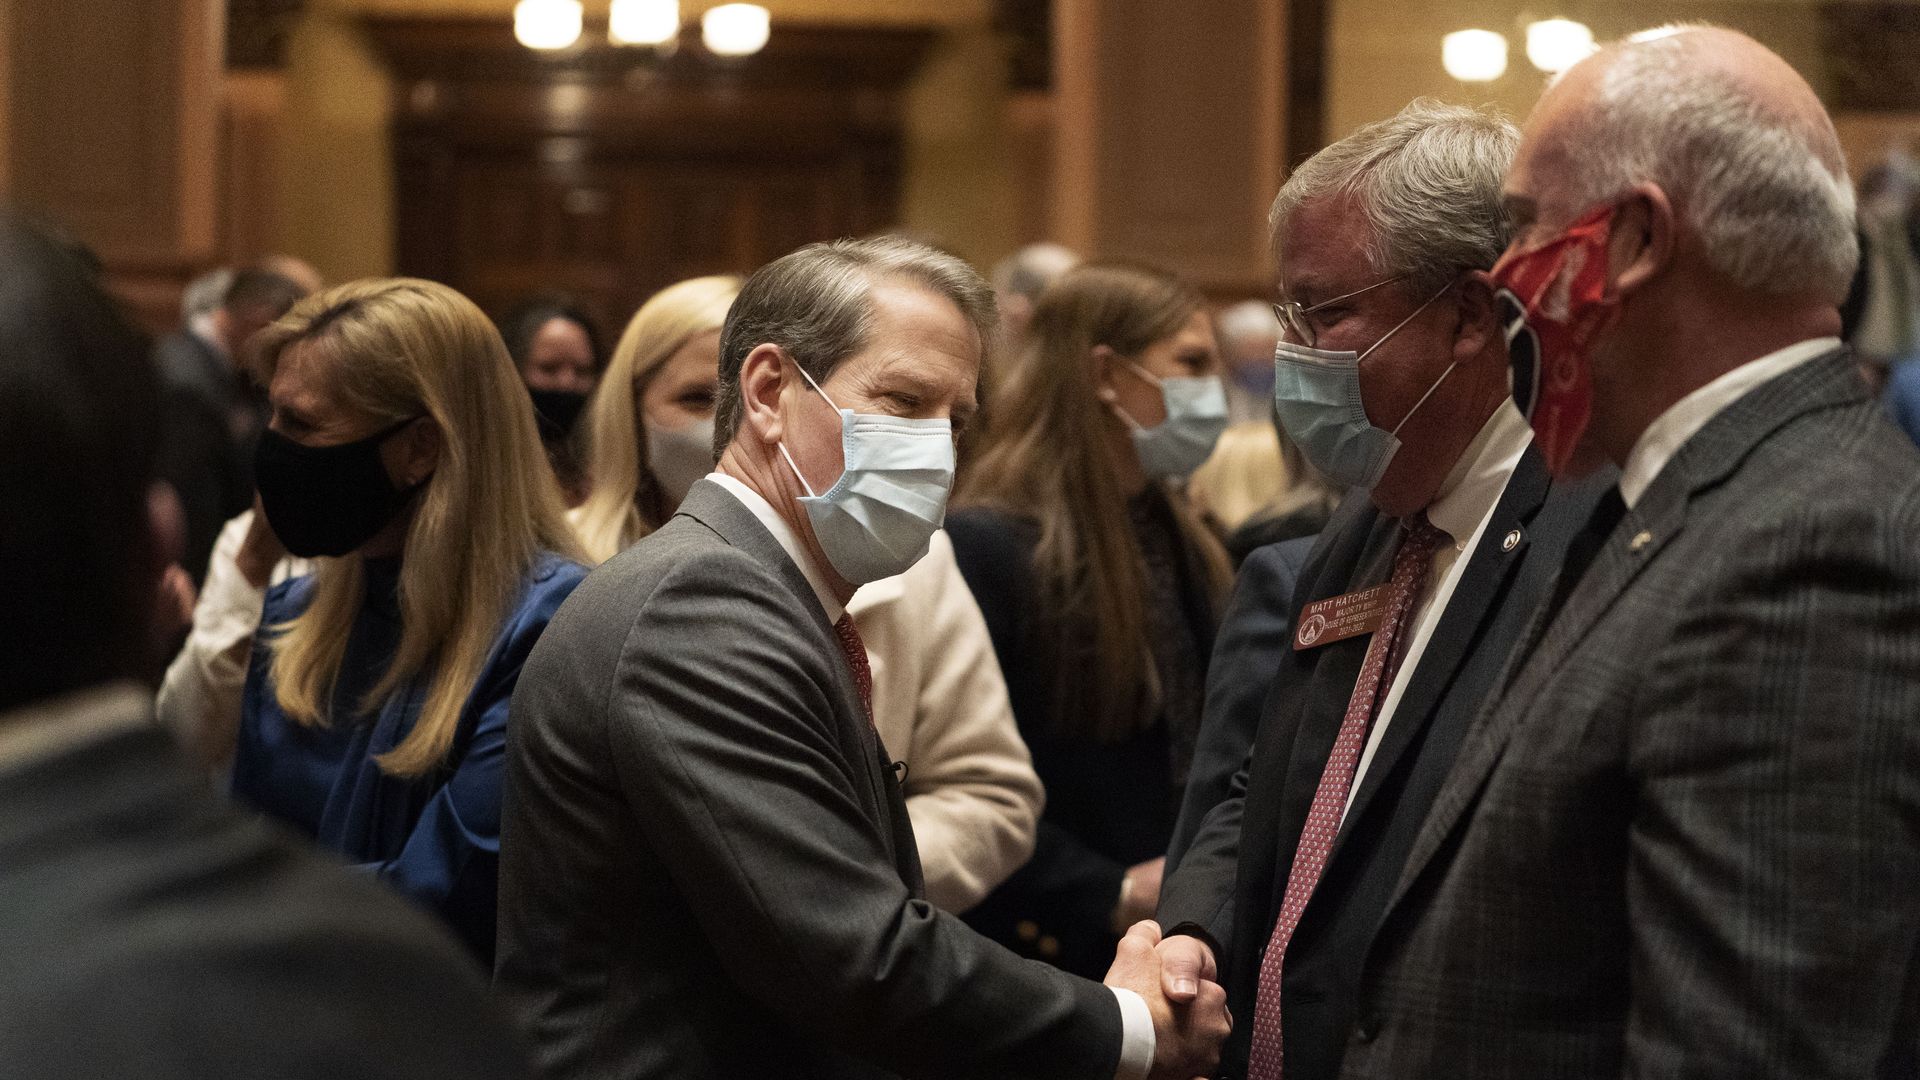 Brian kemp shakes hands with two men, all wearing masks